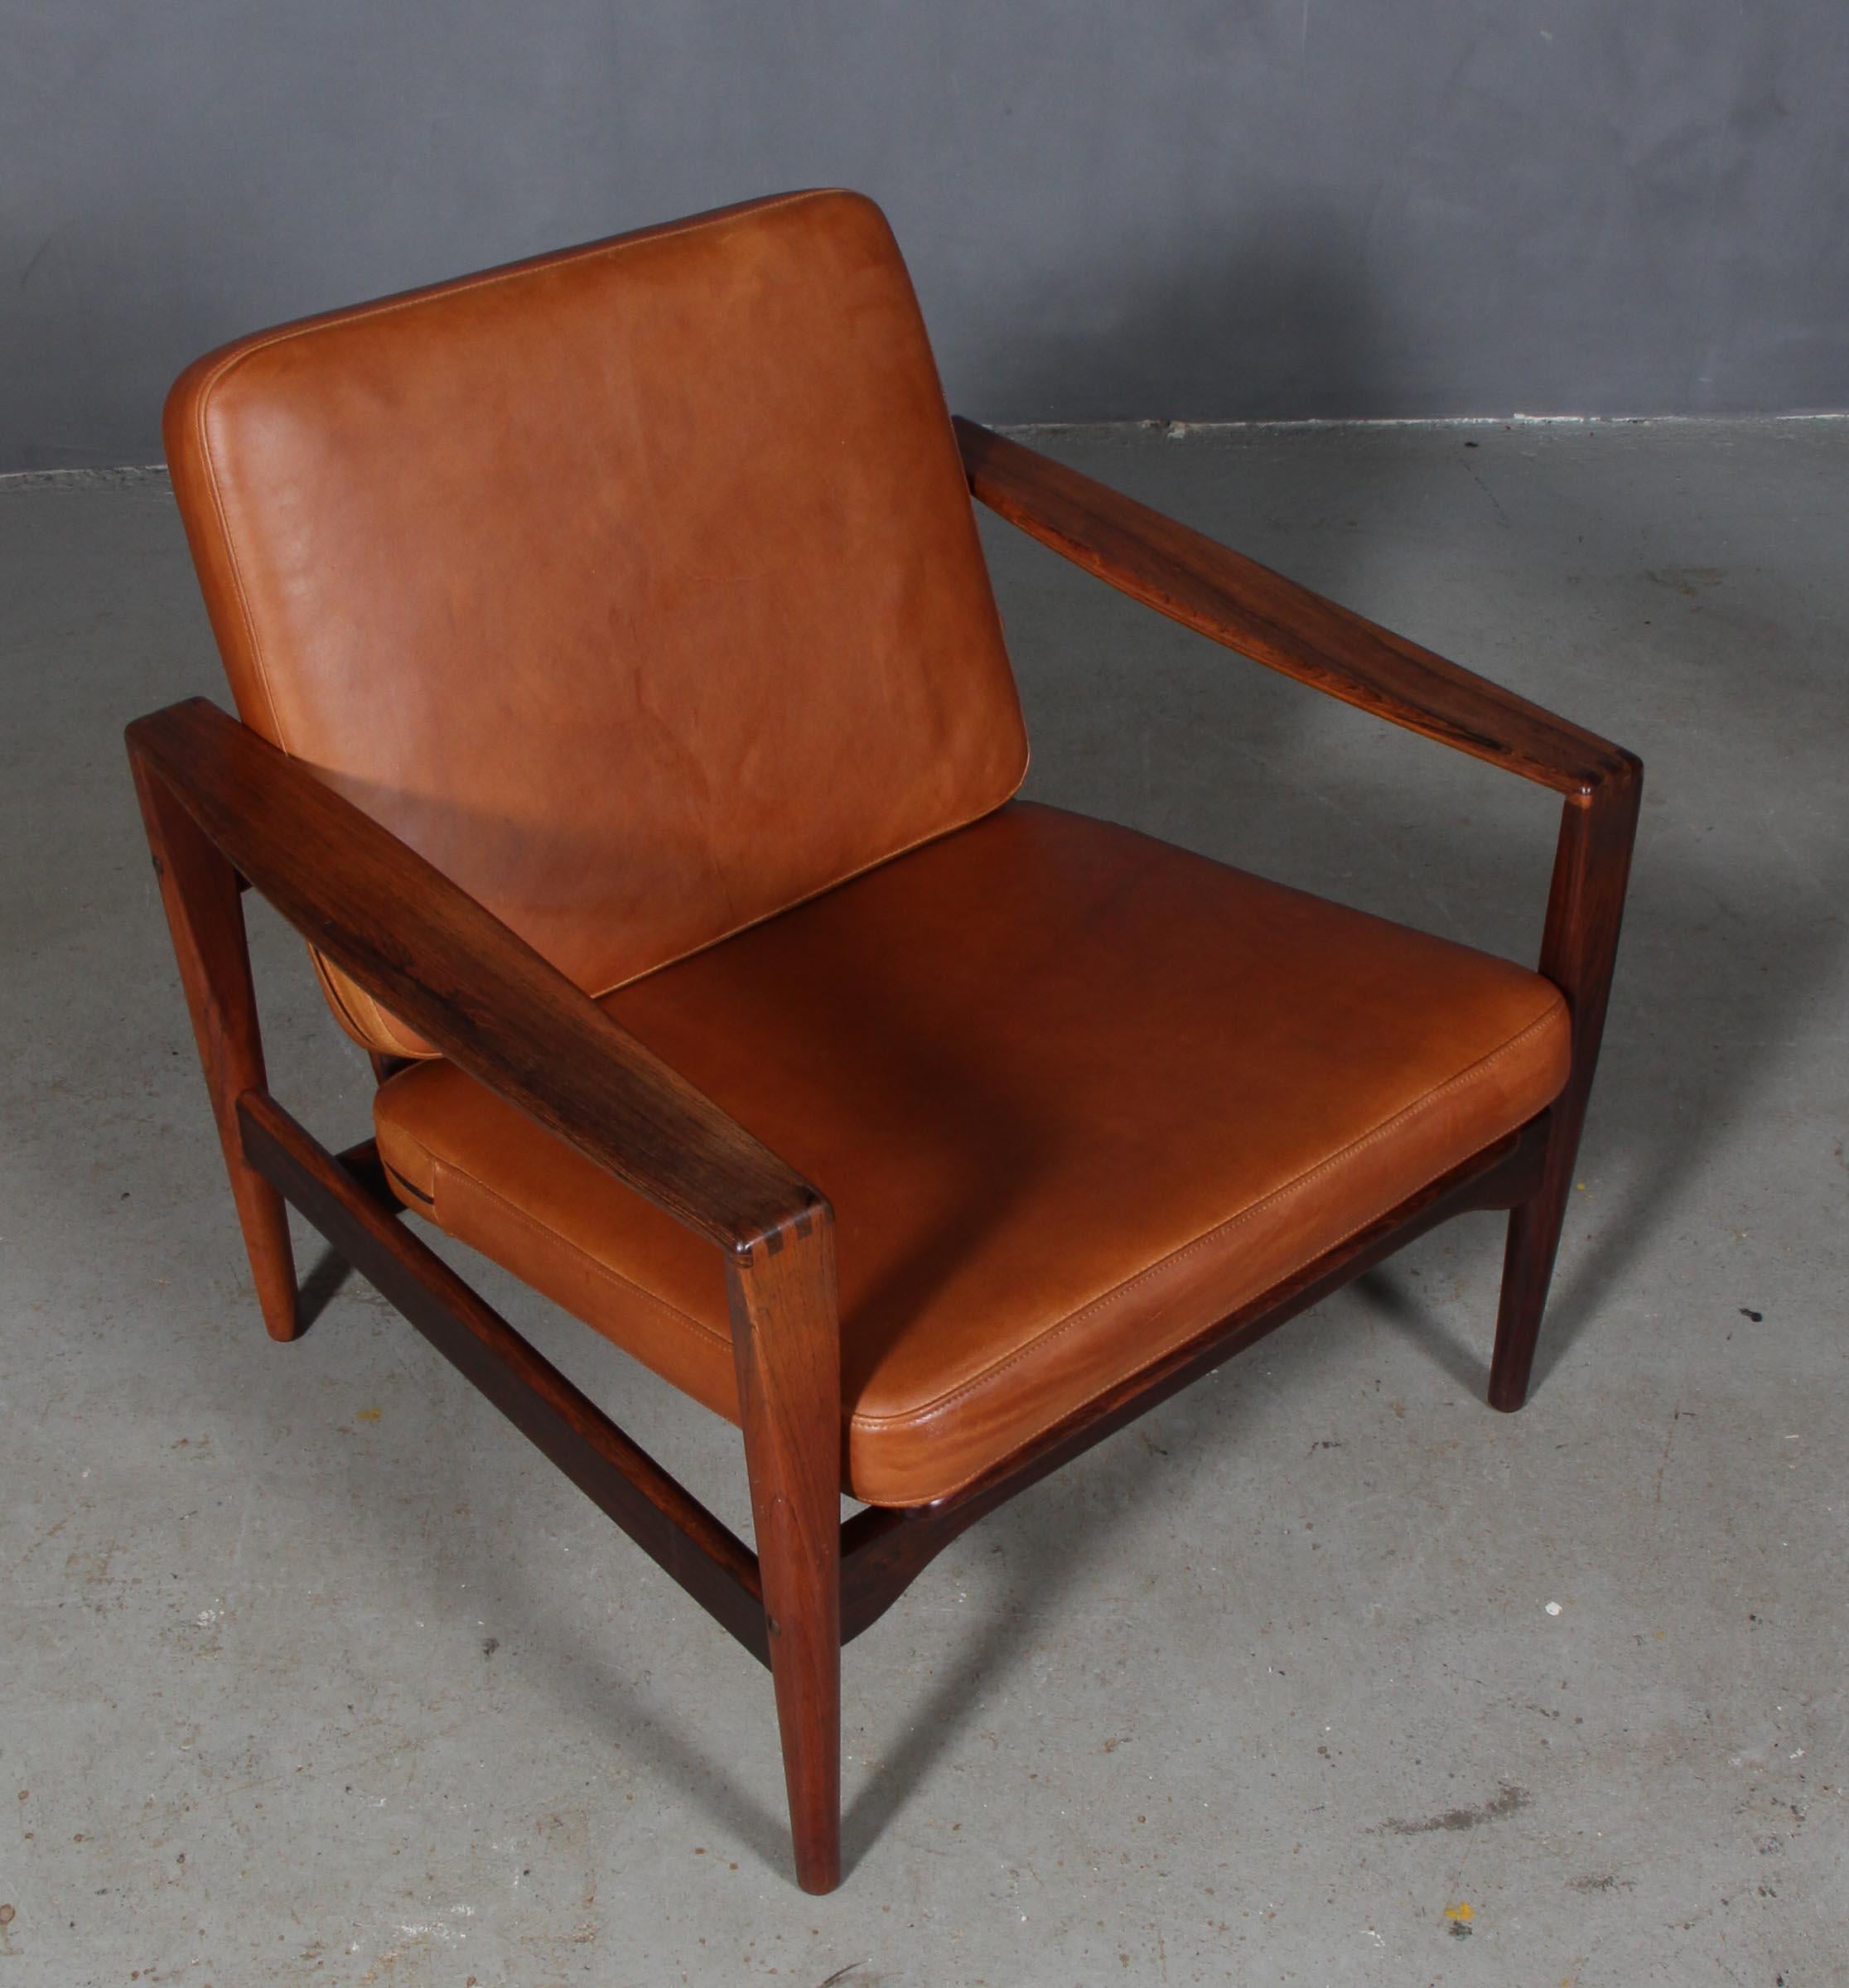 Illum Wikkelsø lounge chair in solid rosewood.

New upholstered cushions in tan Vintage anilin leather.

Model EK. Very rare.